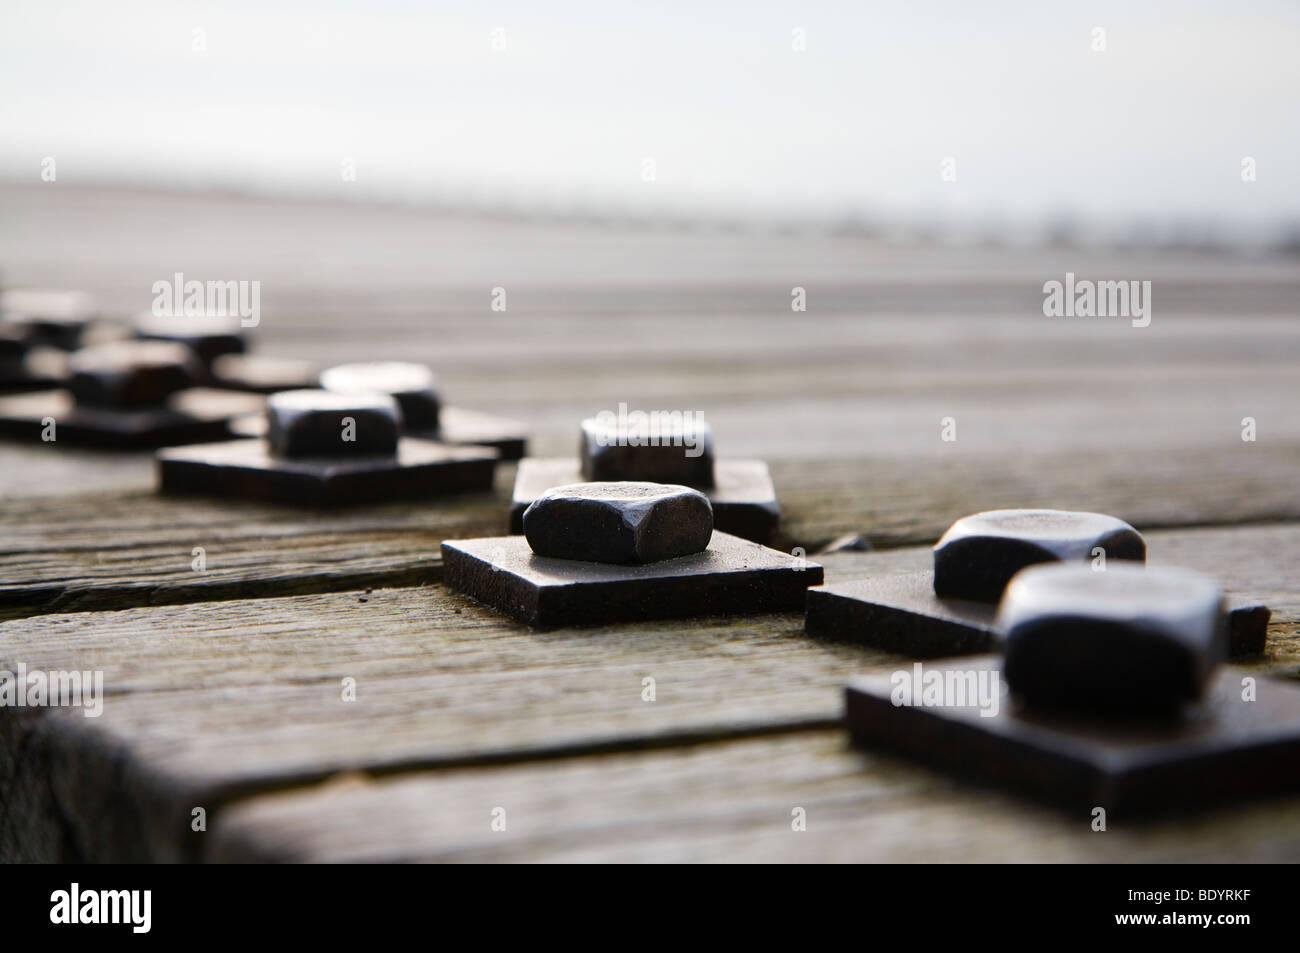 A line of nuts and bolts holding together a wooden jetty. Stock Photo